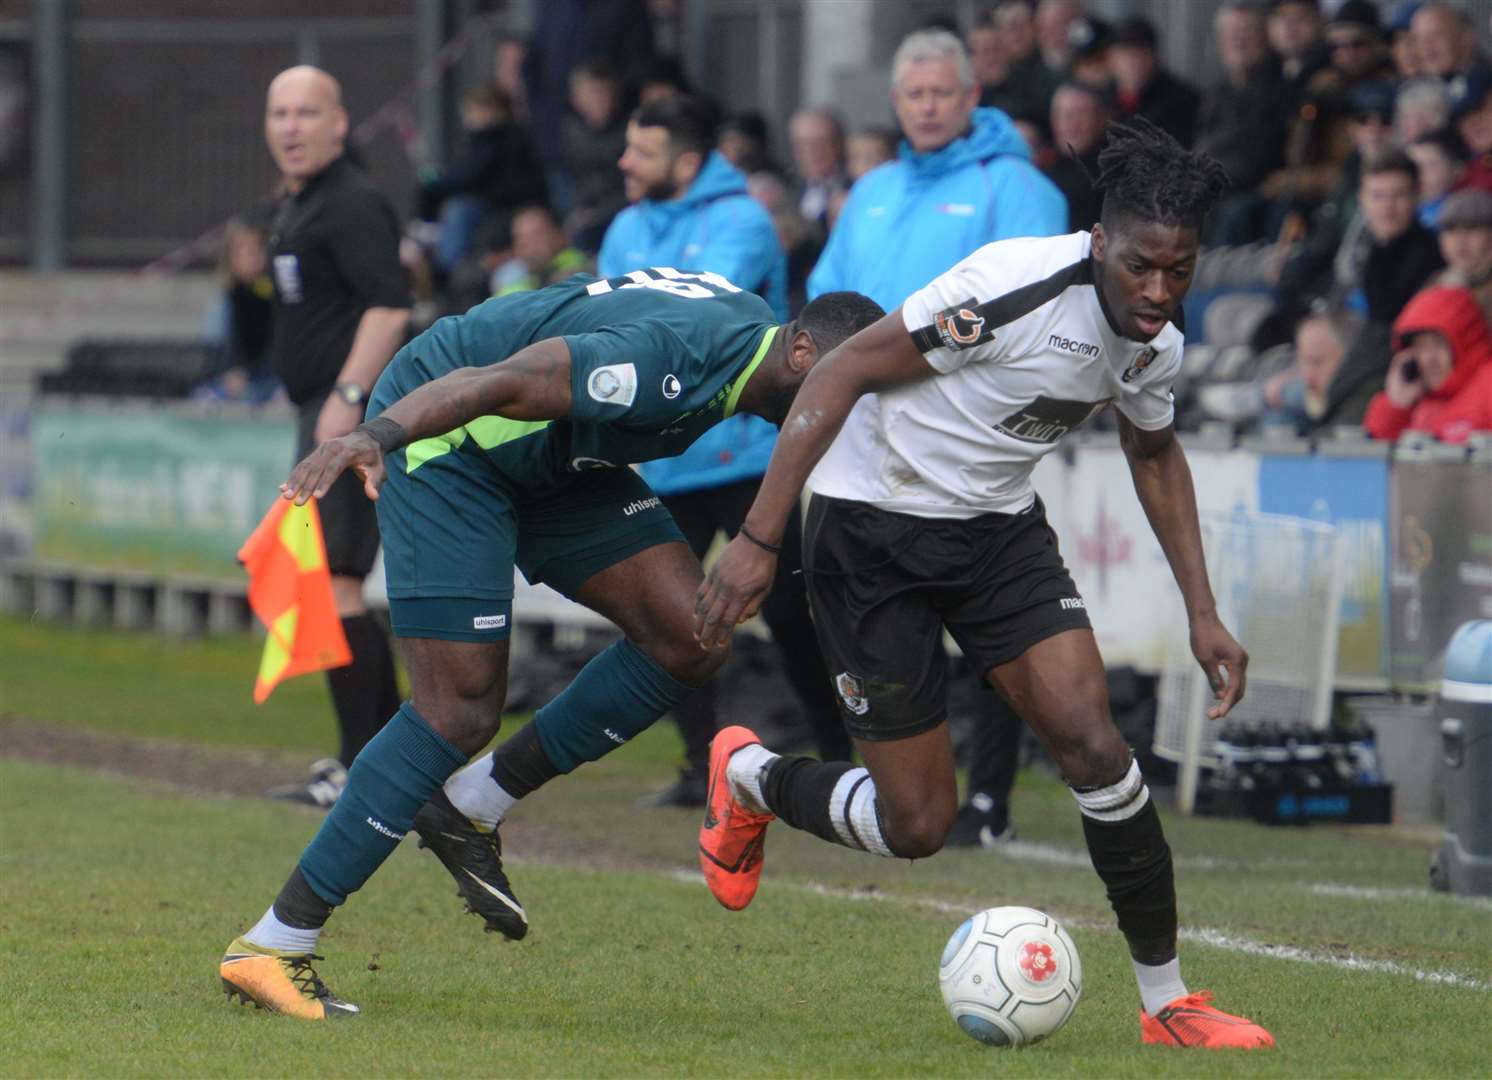 Dartford's Andre Coker gets away from his man against Chippenham. Picture: Chris Davey